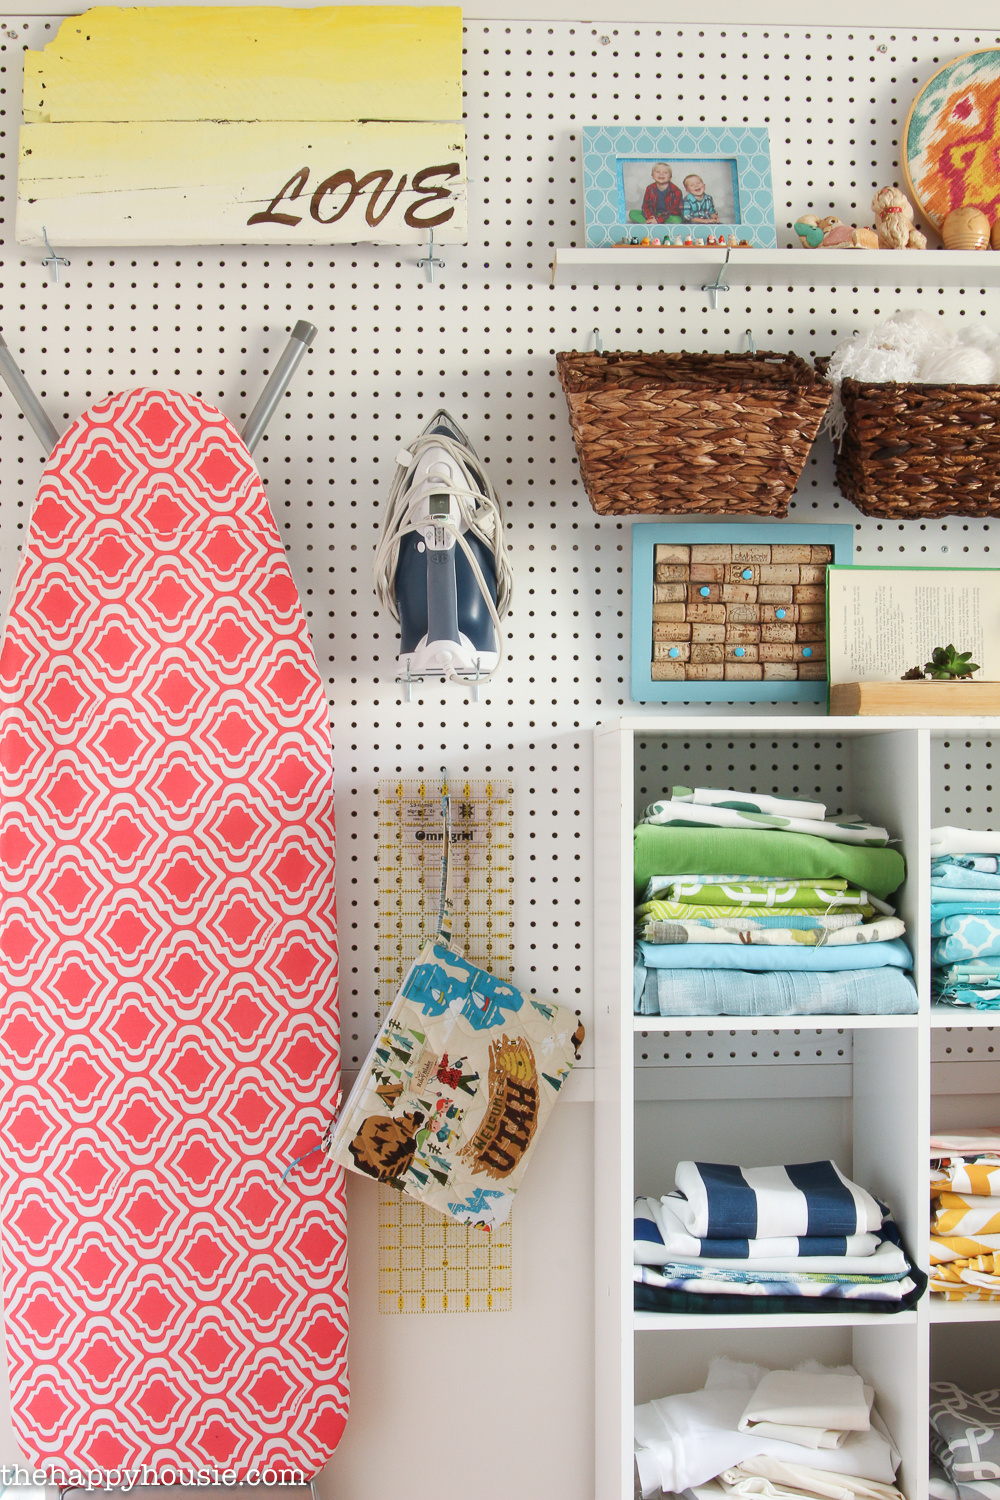 A peg board wall with an ironing board, iron hanging on it.